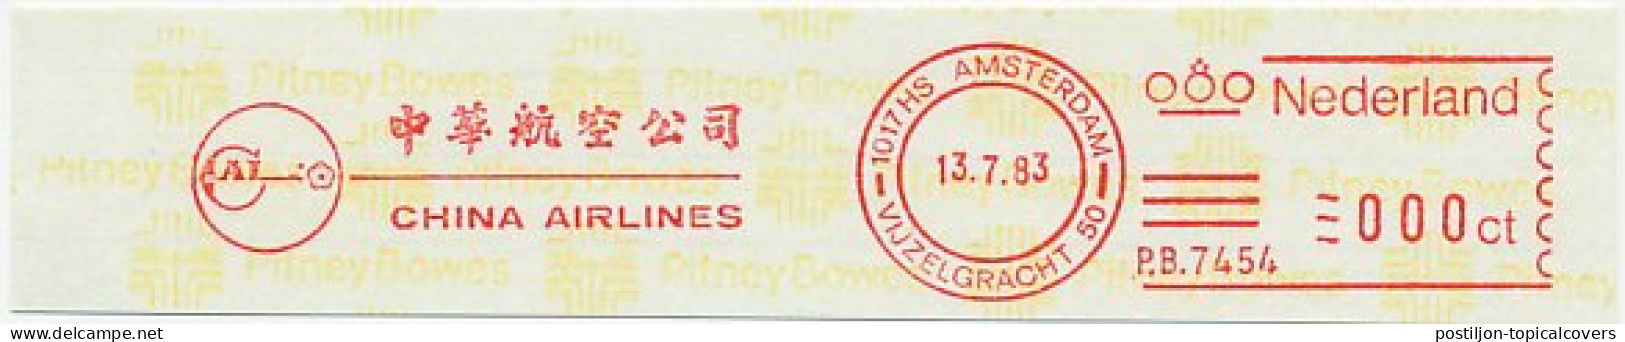 Meter Proof / Test Strip Netherlands 1983 China Airlines - Airplanes